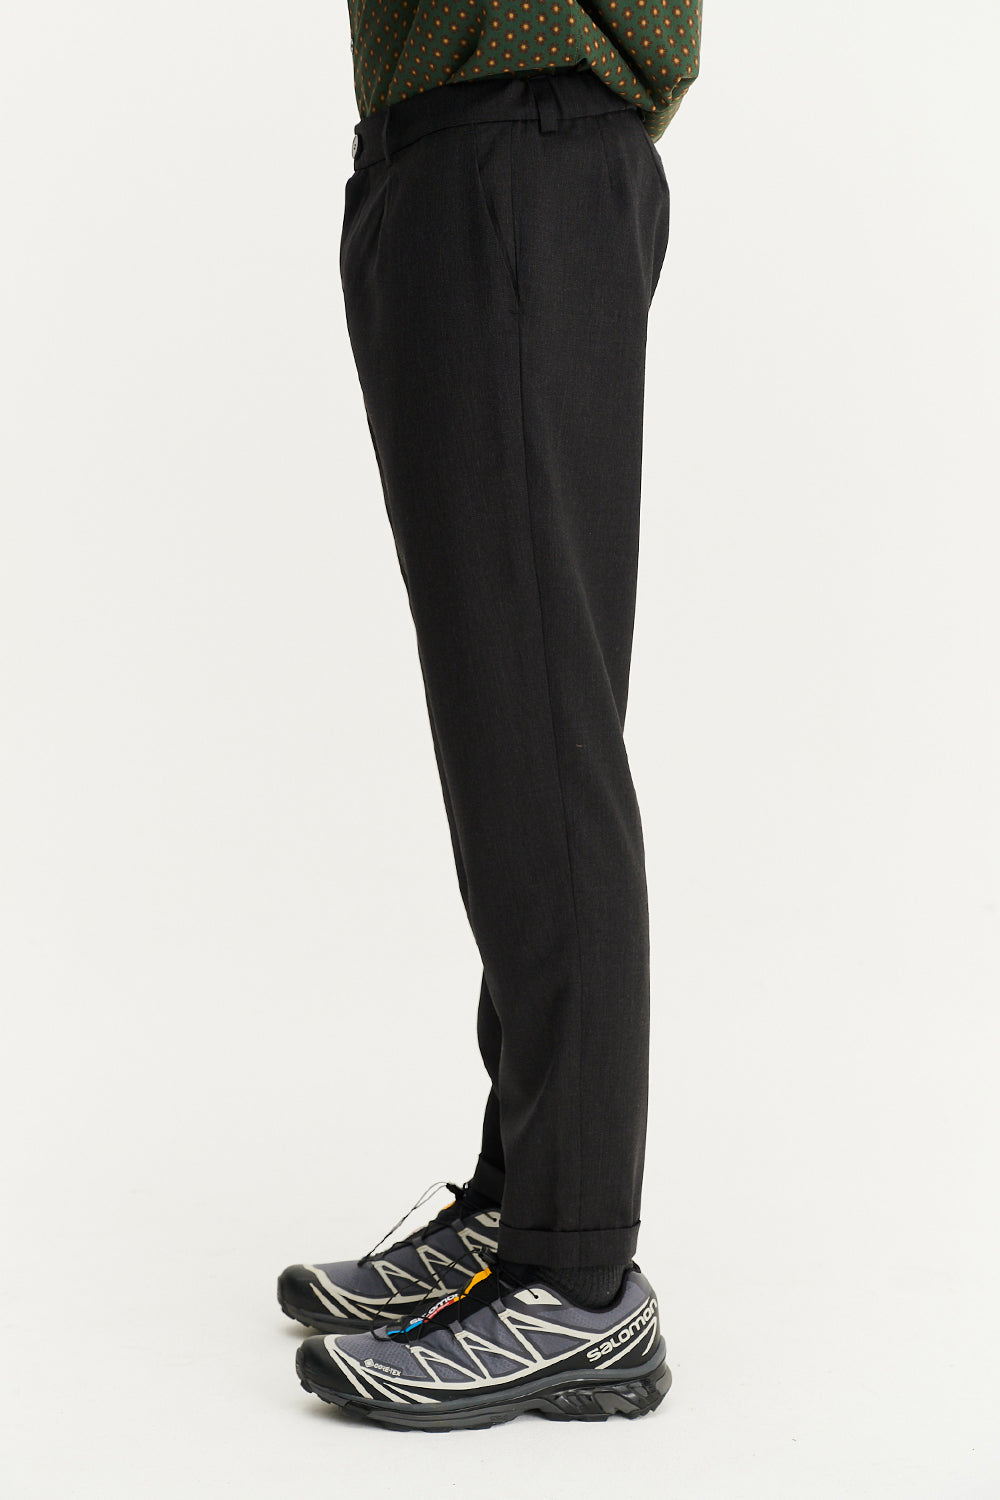 Sienna Tropical Wool Pant Anthracite